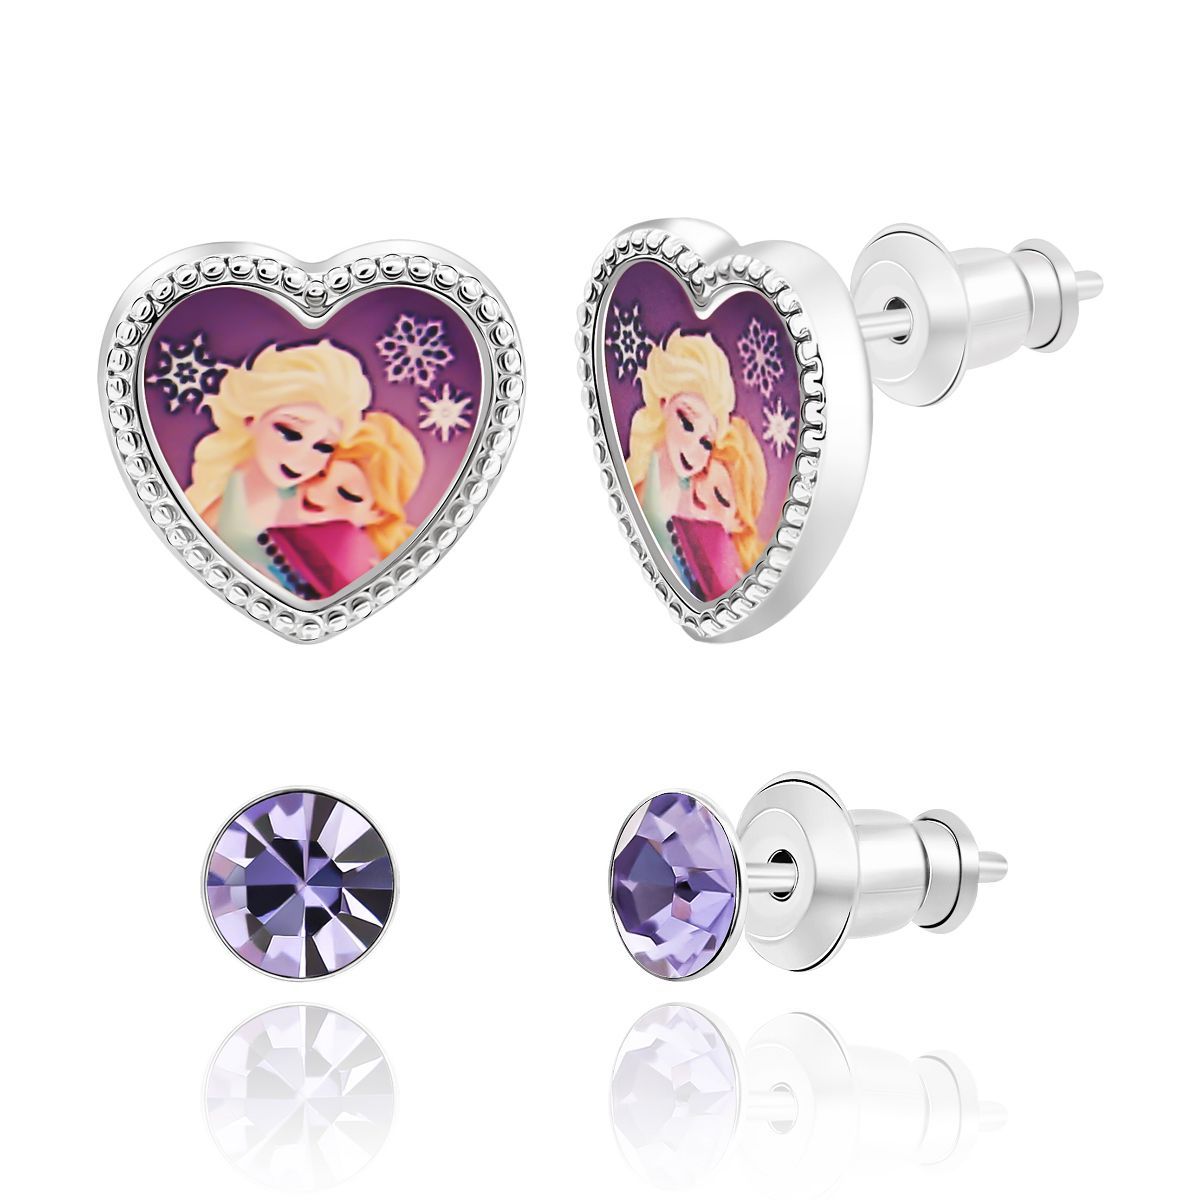 Disney Frozen Anna and Elsa Heart Studs and Crystal Stud Earrings Set | Target